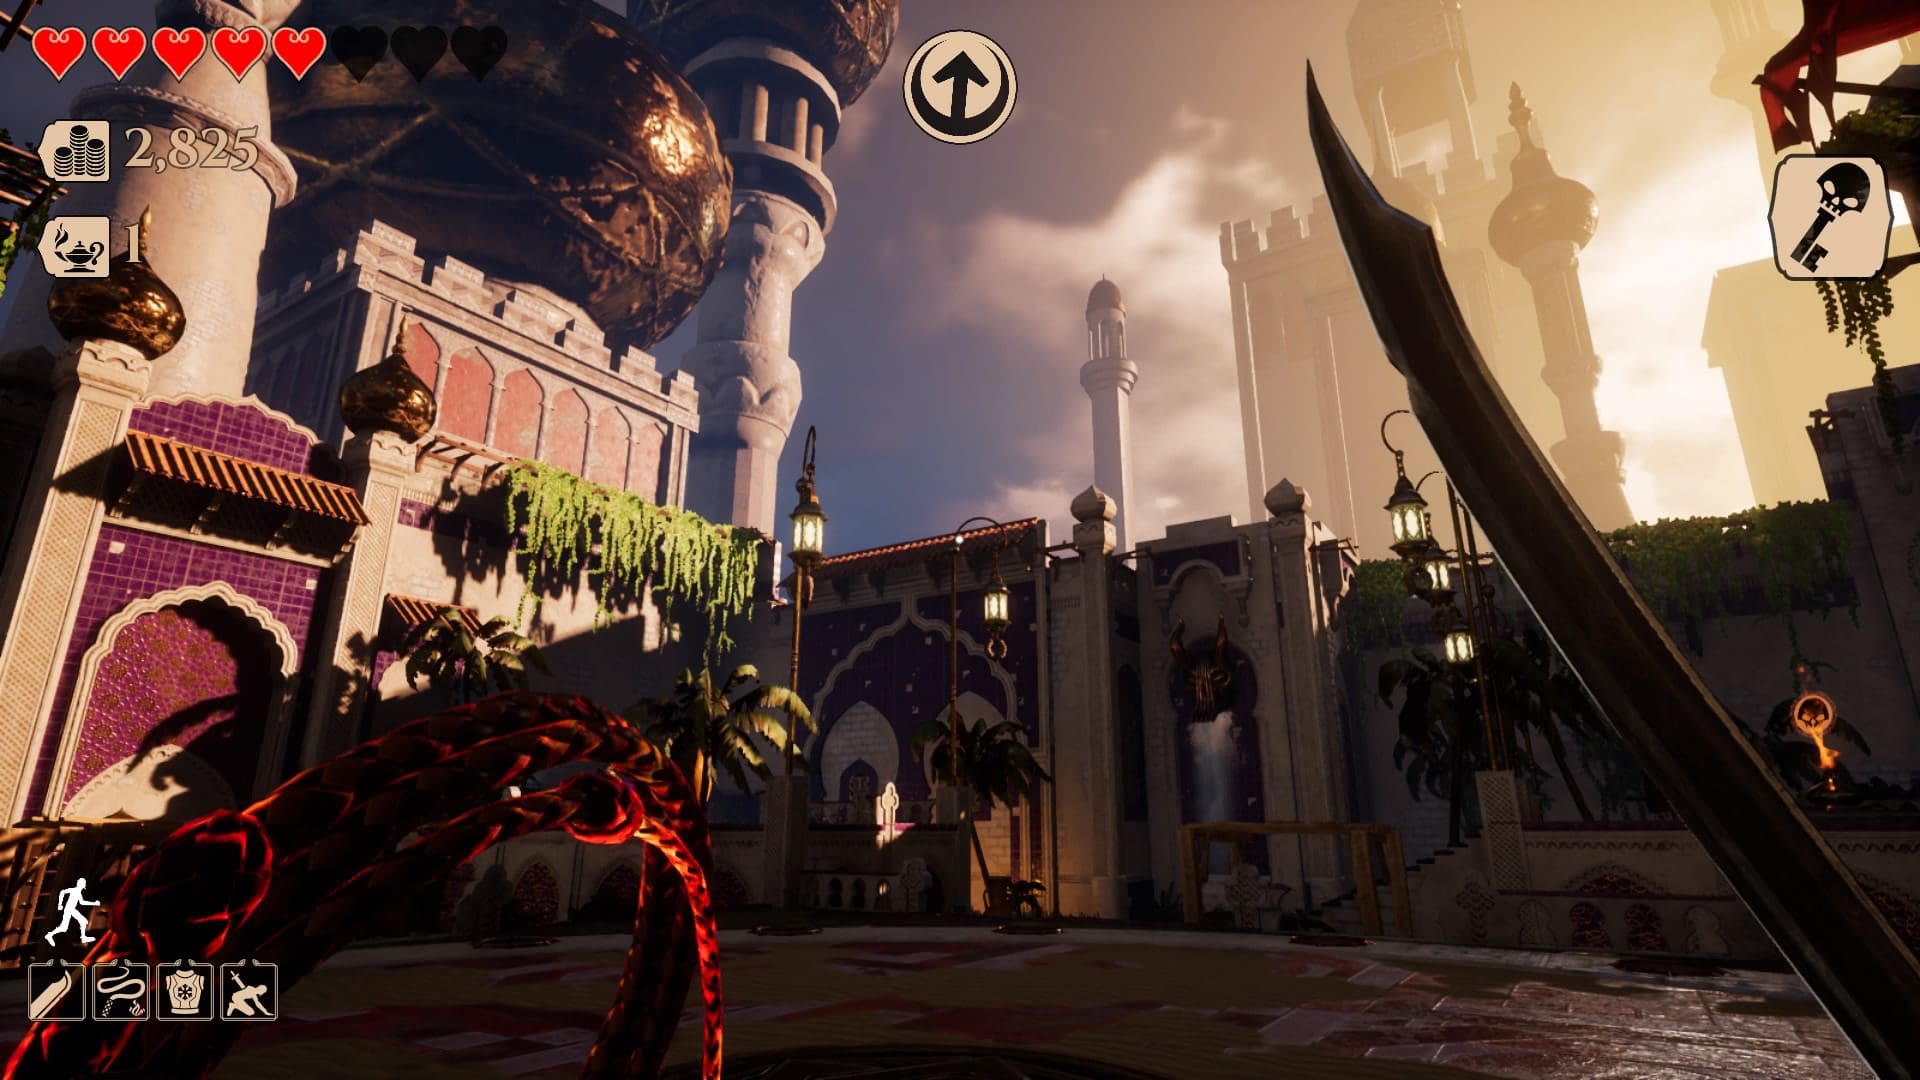 City of Brass for windows download free